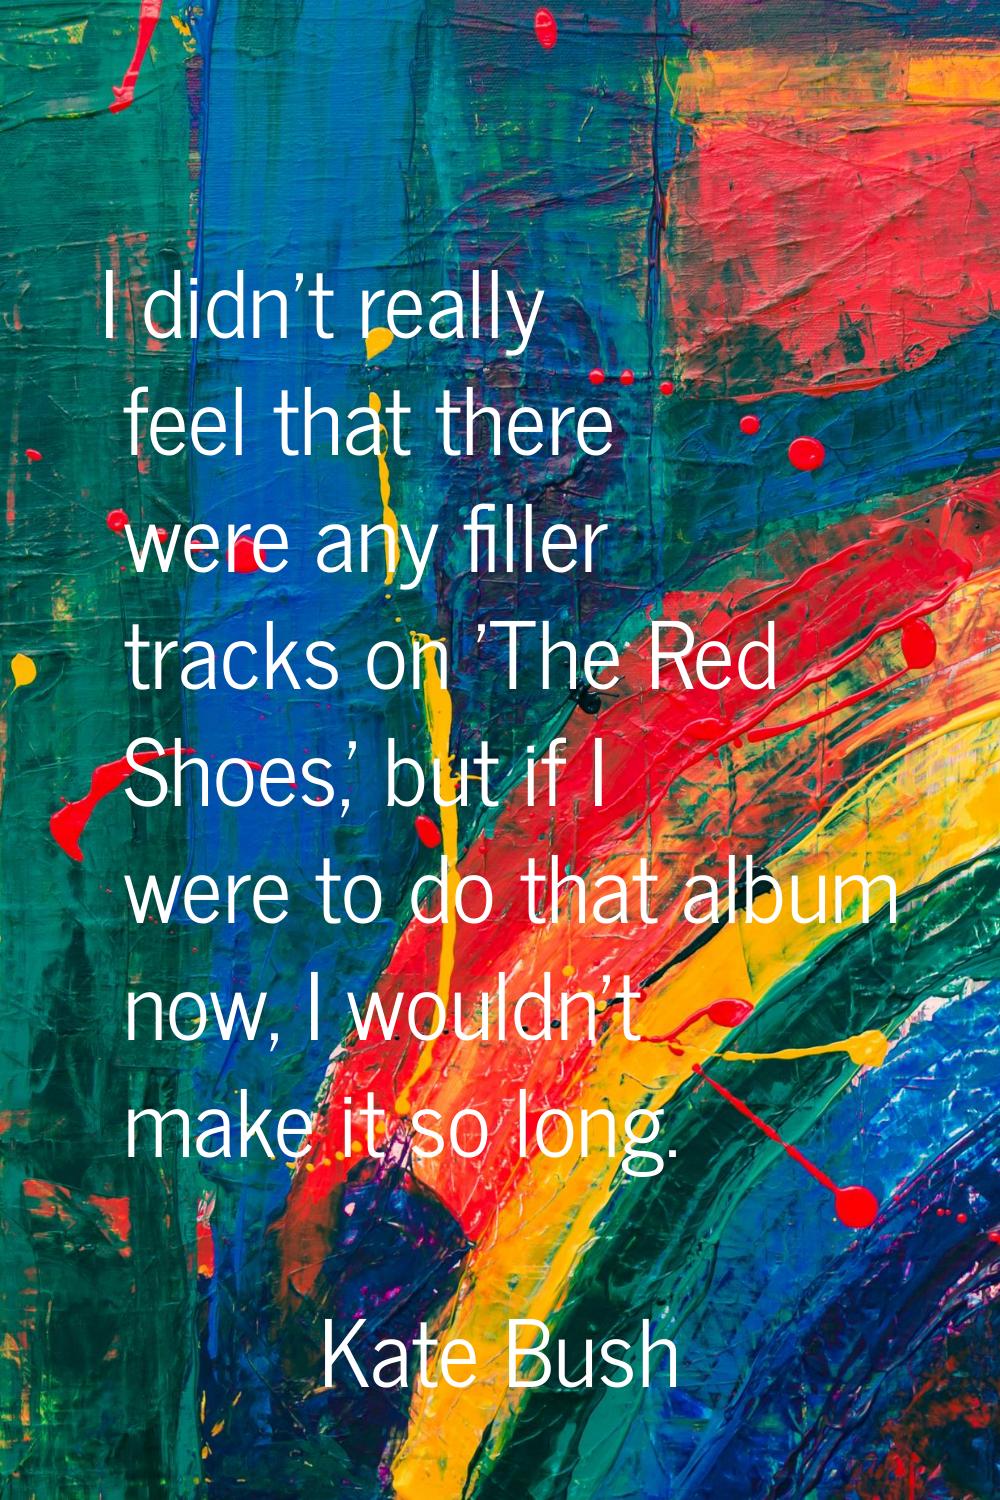 I didn't really feel that there were any filler tracks on 'The Red Shoes,' but if I were to do that